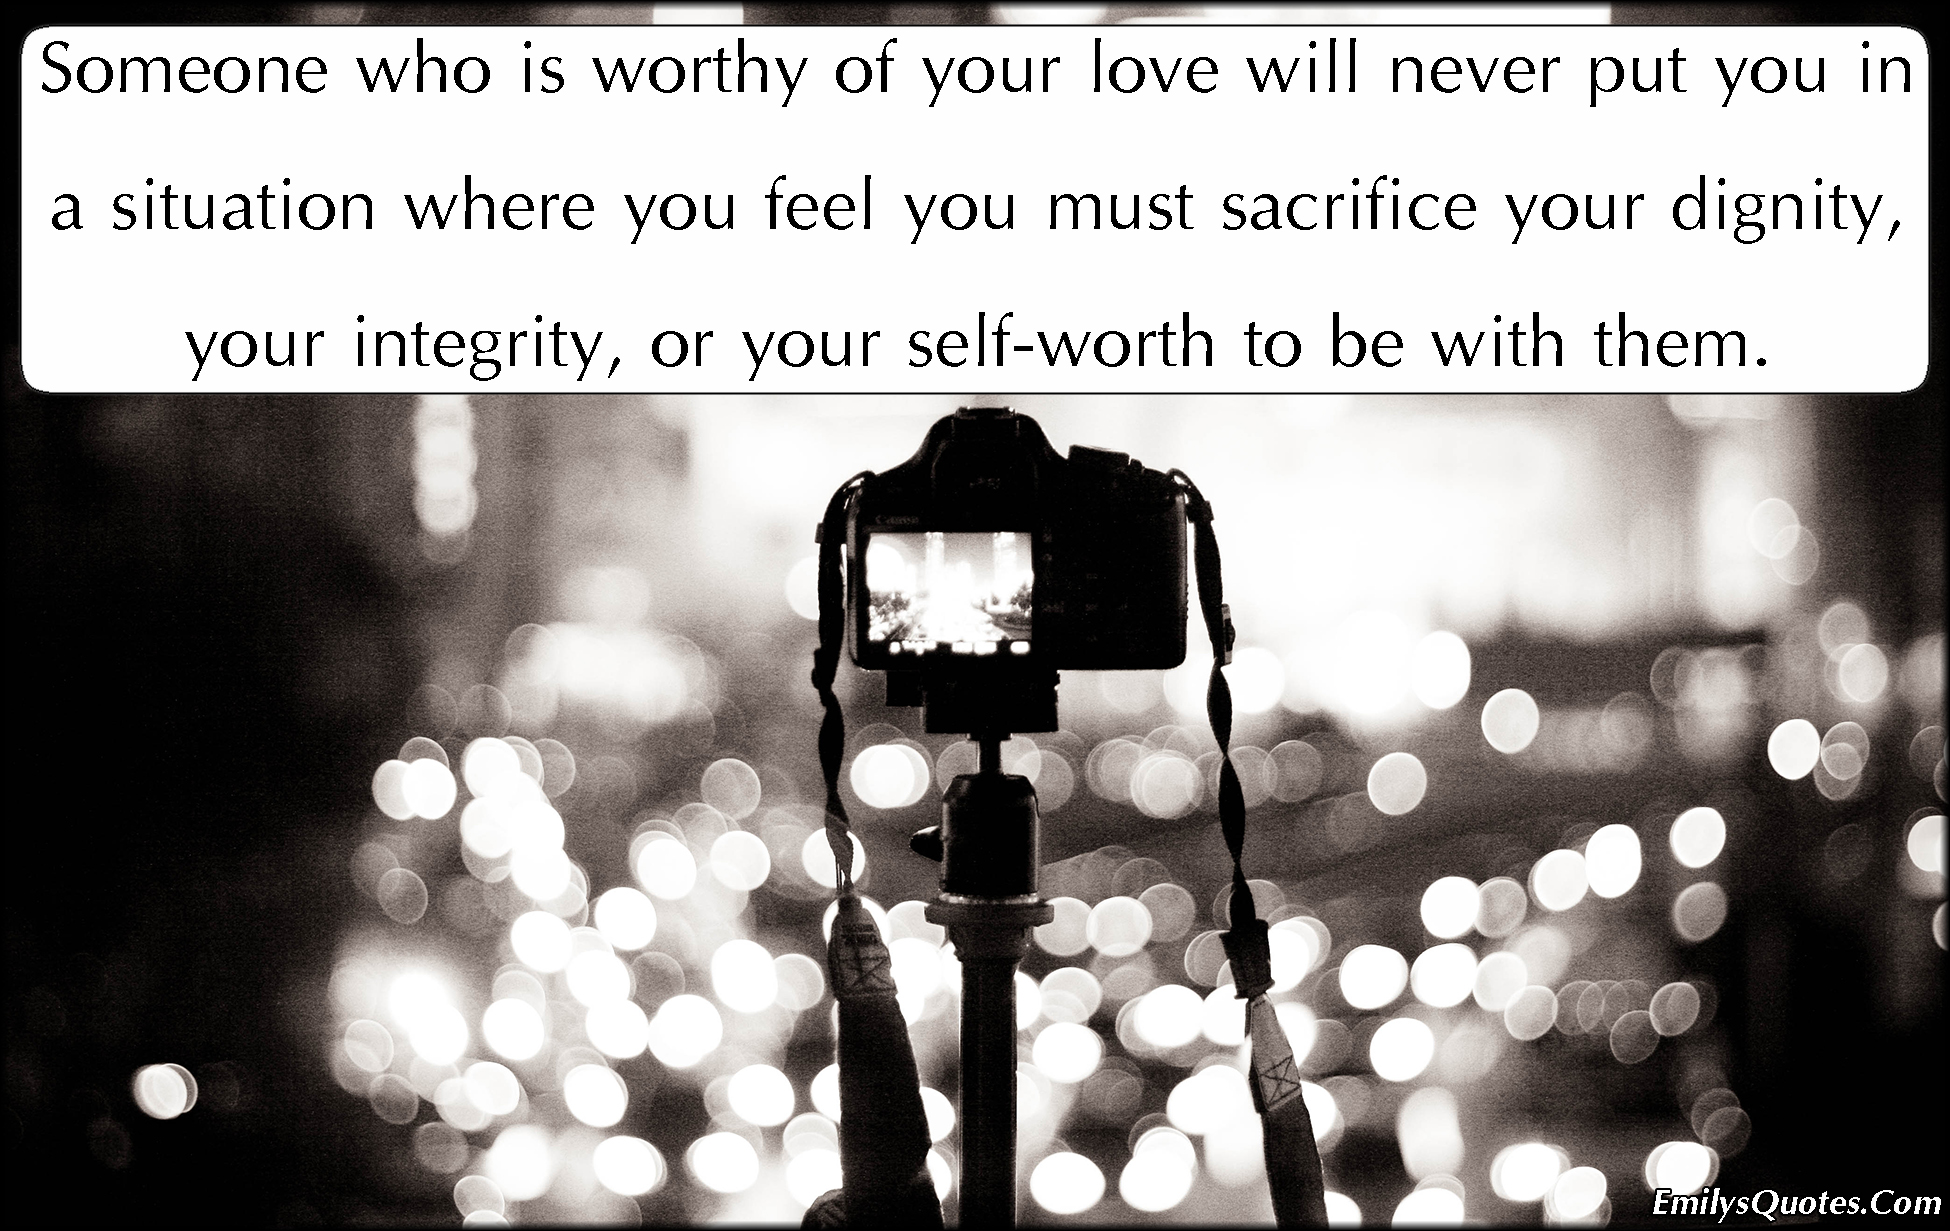 Someone who is worthy of your love will never put you in a situation where you feel you must sacrifice your dignity, your integrity, or your self-worth to be with them